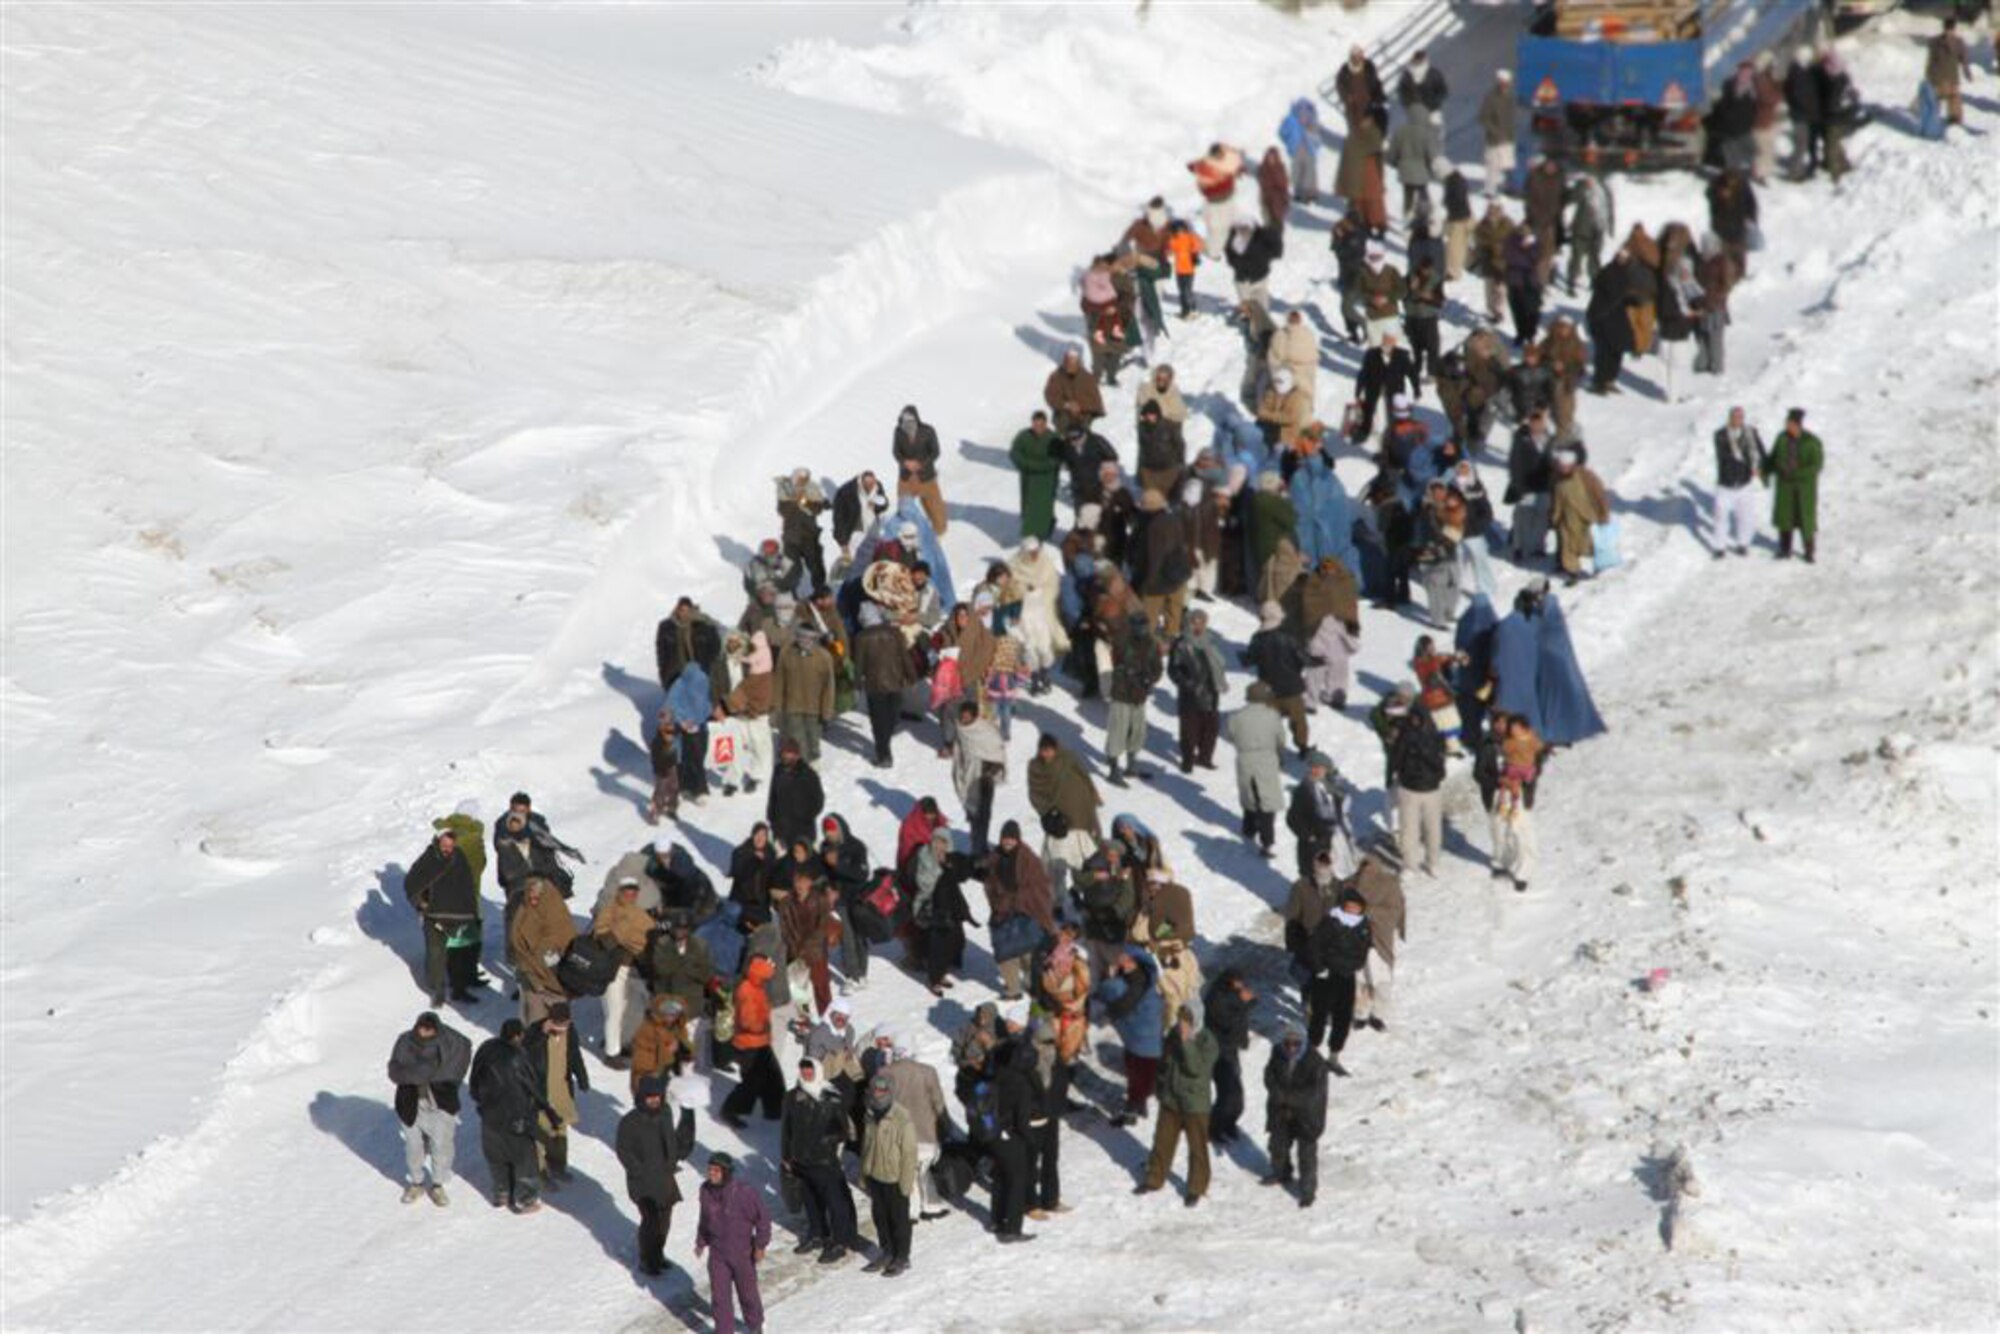 More than 1500 Afghans were stranded in the Salang Pass, Afghanistan after 36 avalanches ravaged the area Feb. 8-9, 2010. (Courtesy photo)